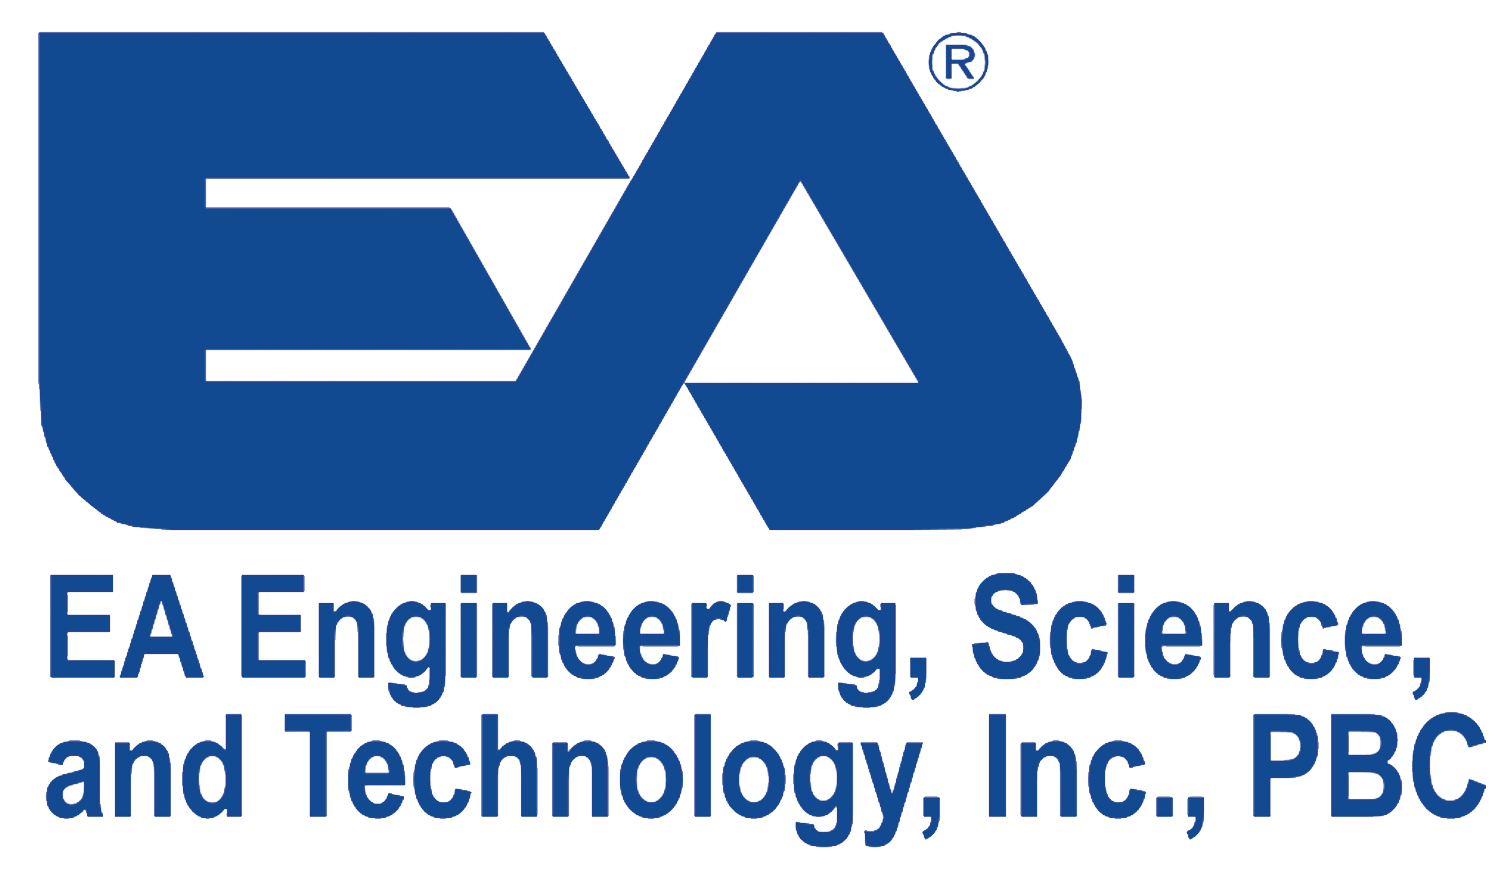 EA Engineering, Science, and Technology, Inc.